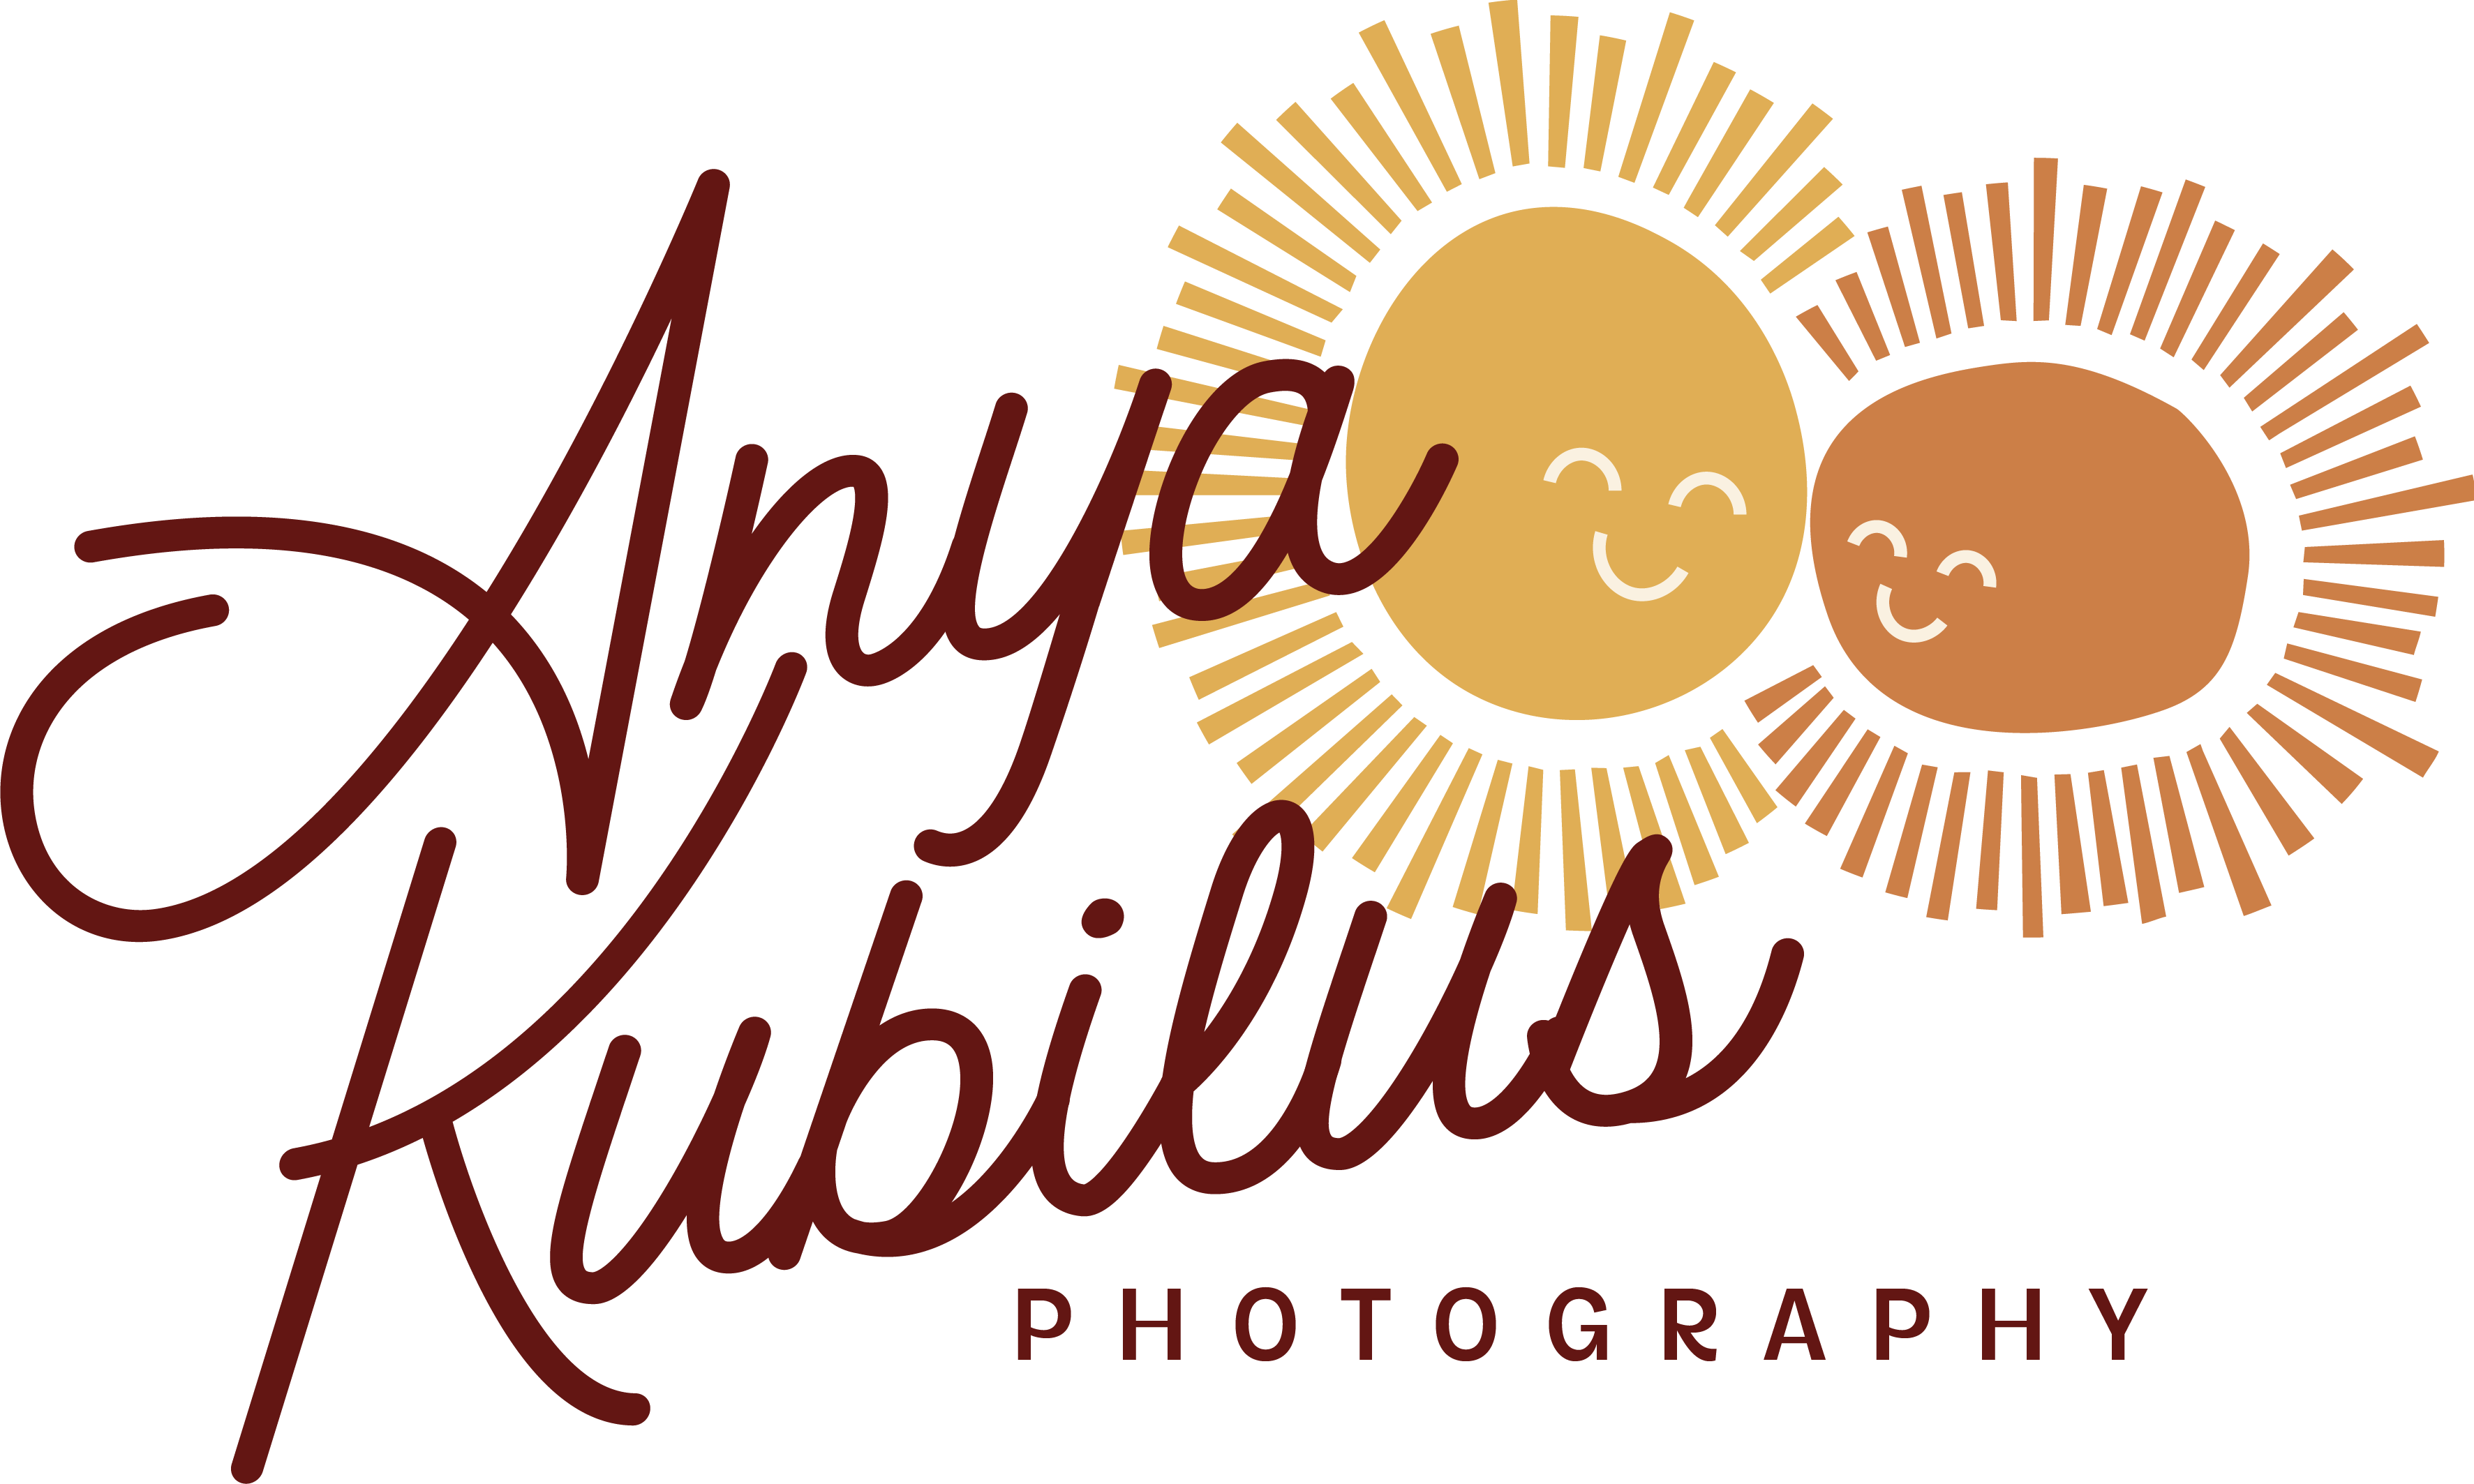 Anya Kubilus Photography logo with two suns next to each other